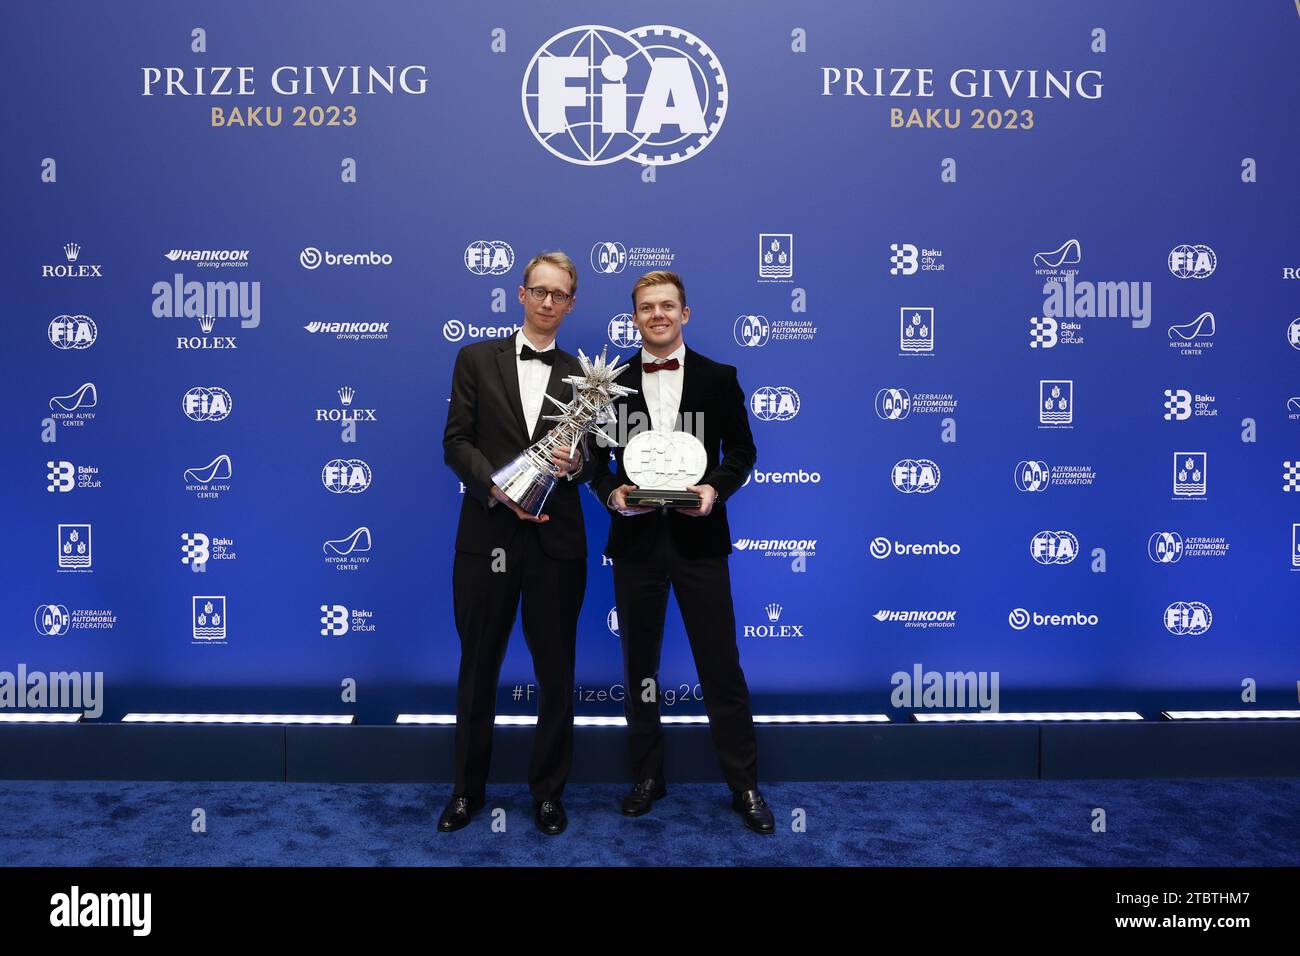 FILIPPI Sylvain, ABB FIA Formula E World Championship - Manufacturer Champion, portrait CASSIDY Nick, ABB FIA Formula E World Championship - 2nd Place, portrait during the 2023 FIA Prize Giving Ceremony in Baky on December 8, 2023 at Baku Convention Center in Baku, Azerbaijan Credit: Independent Photo Agency/Alamy Live News Stock Photo